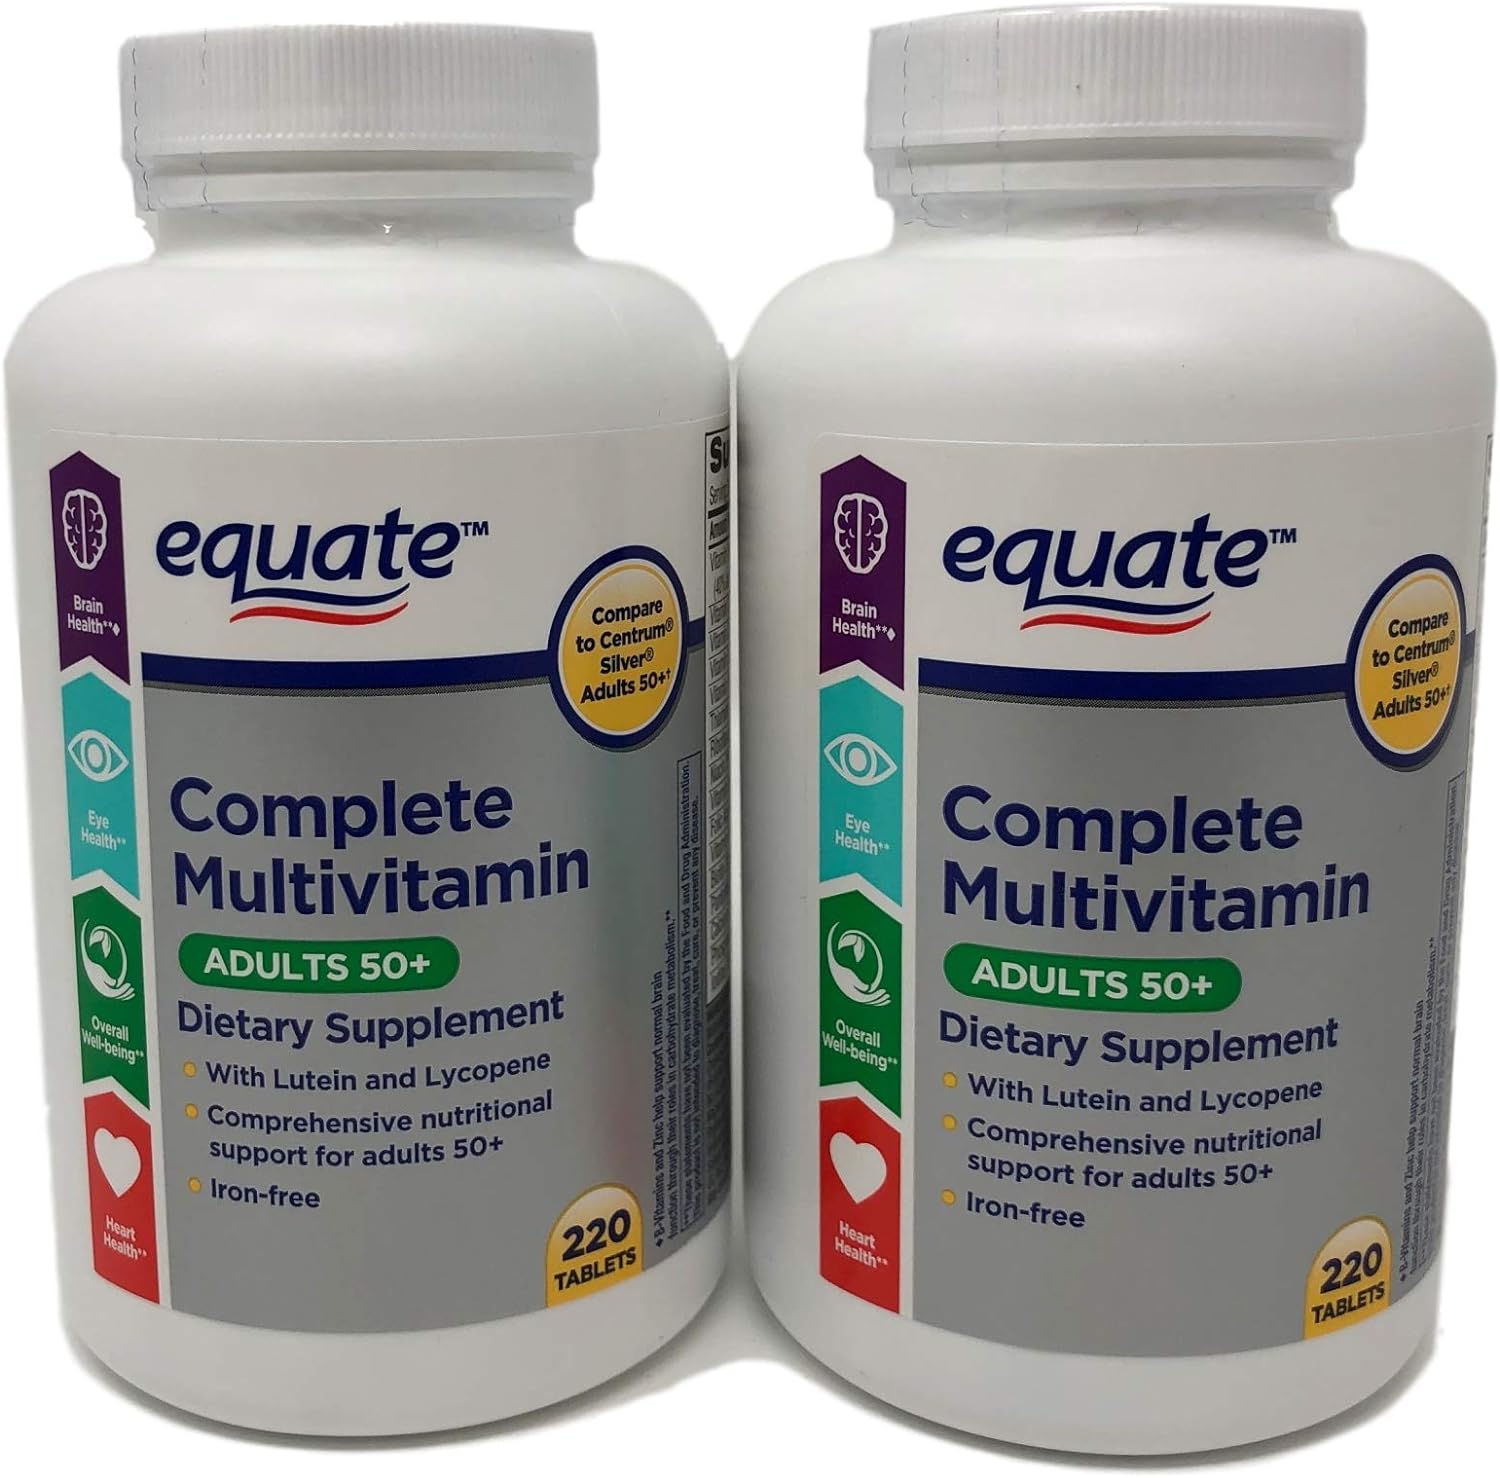 Equate Mature Adult 50+ One Daily Complete Multivitamin Compare to Cen